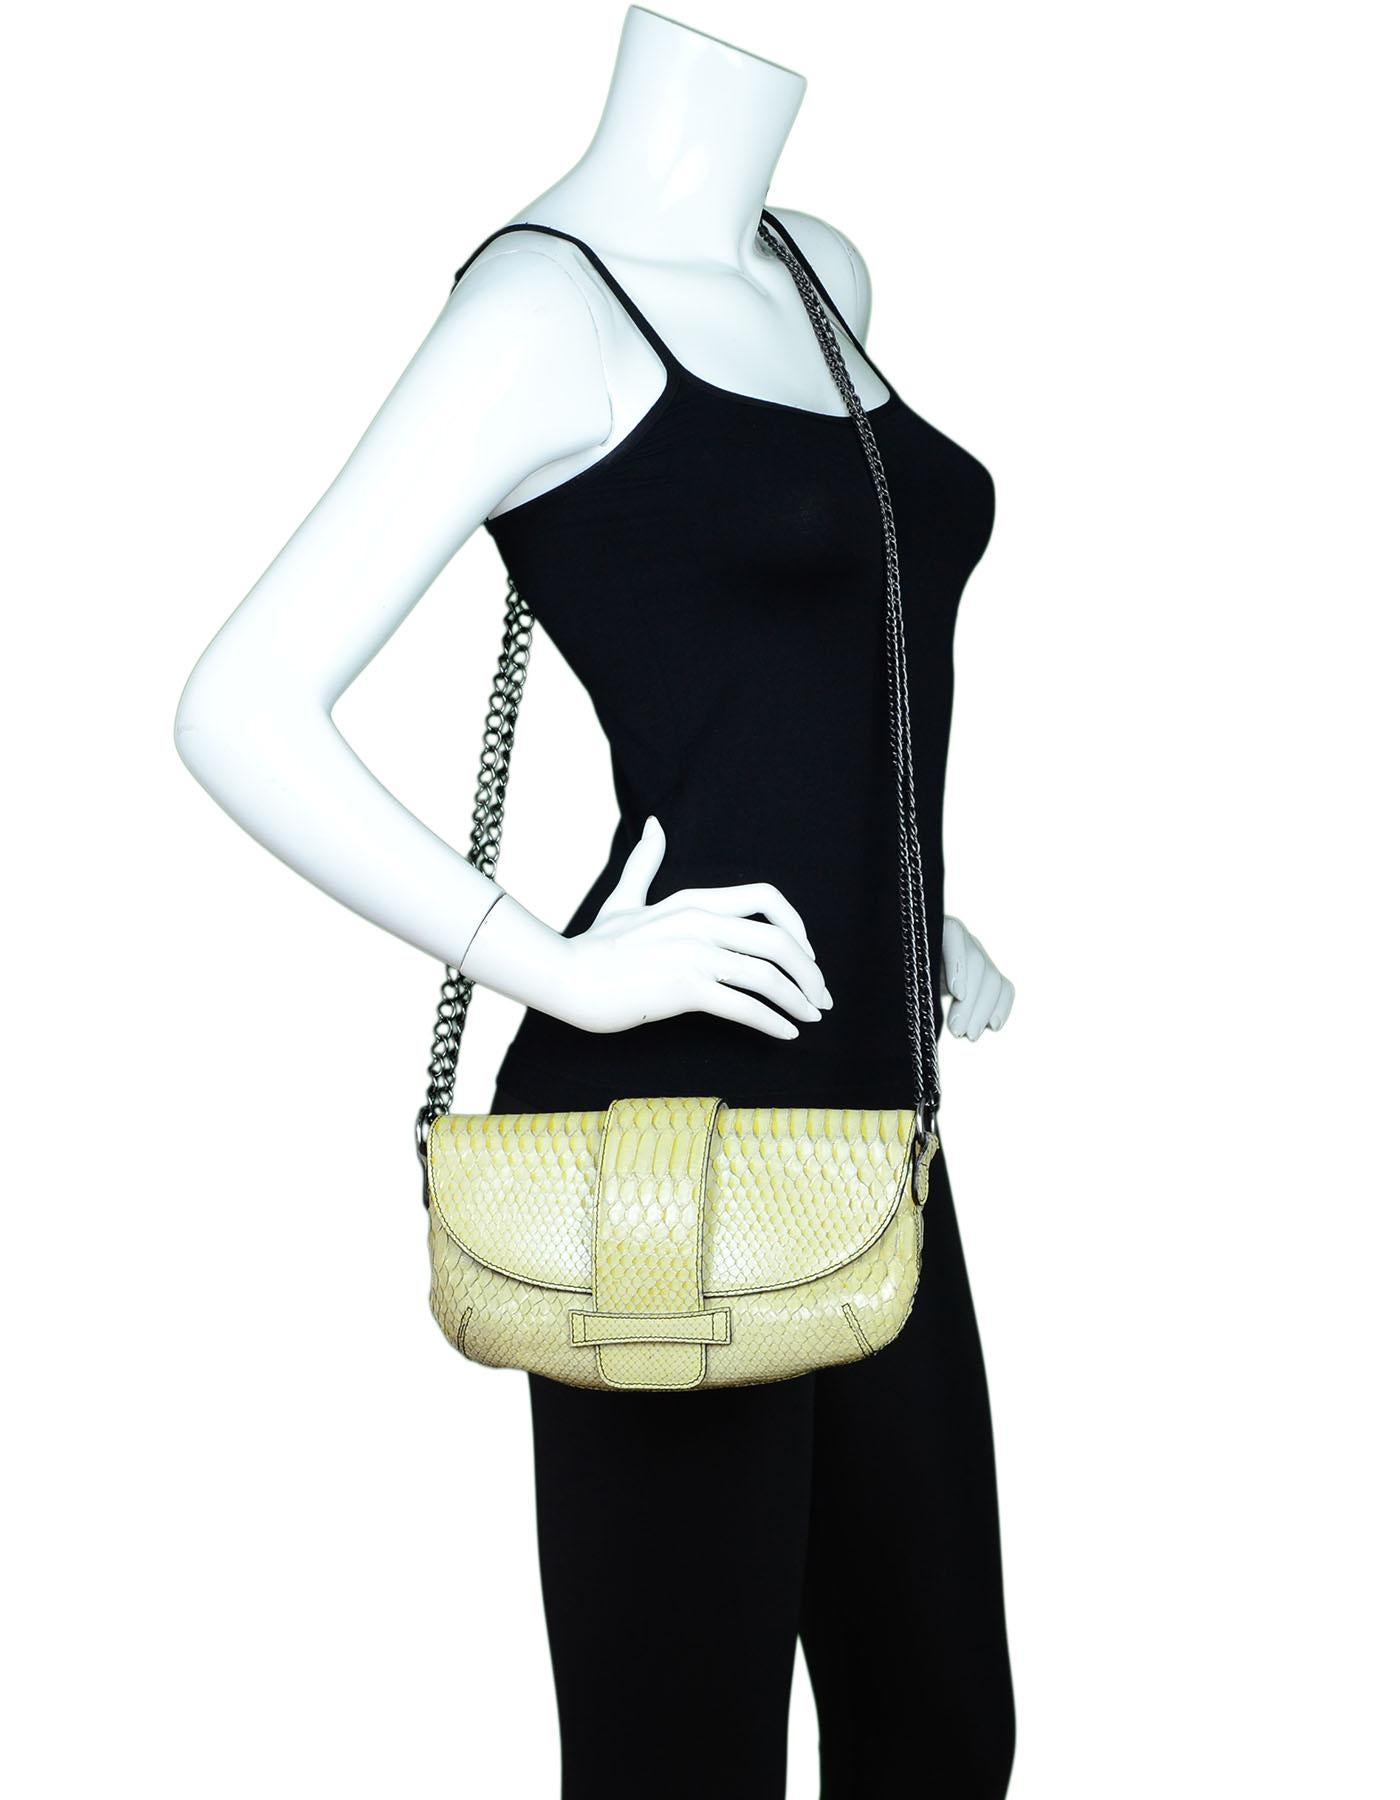 Sigerson Morrison Beige Python Crossbody

Made In: Italy
Color: Beige
Hardware: Gunmetal
Materials: Python, metal
Lining: Black textile
Closure/Opening: Flap top with front tab closure
Exterior Pockets: None
Interior Pockets: Zip wall pocket
Overall